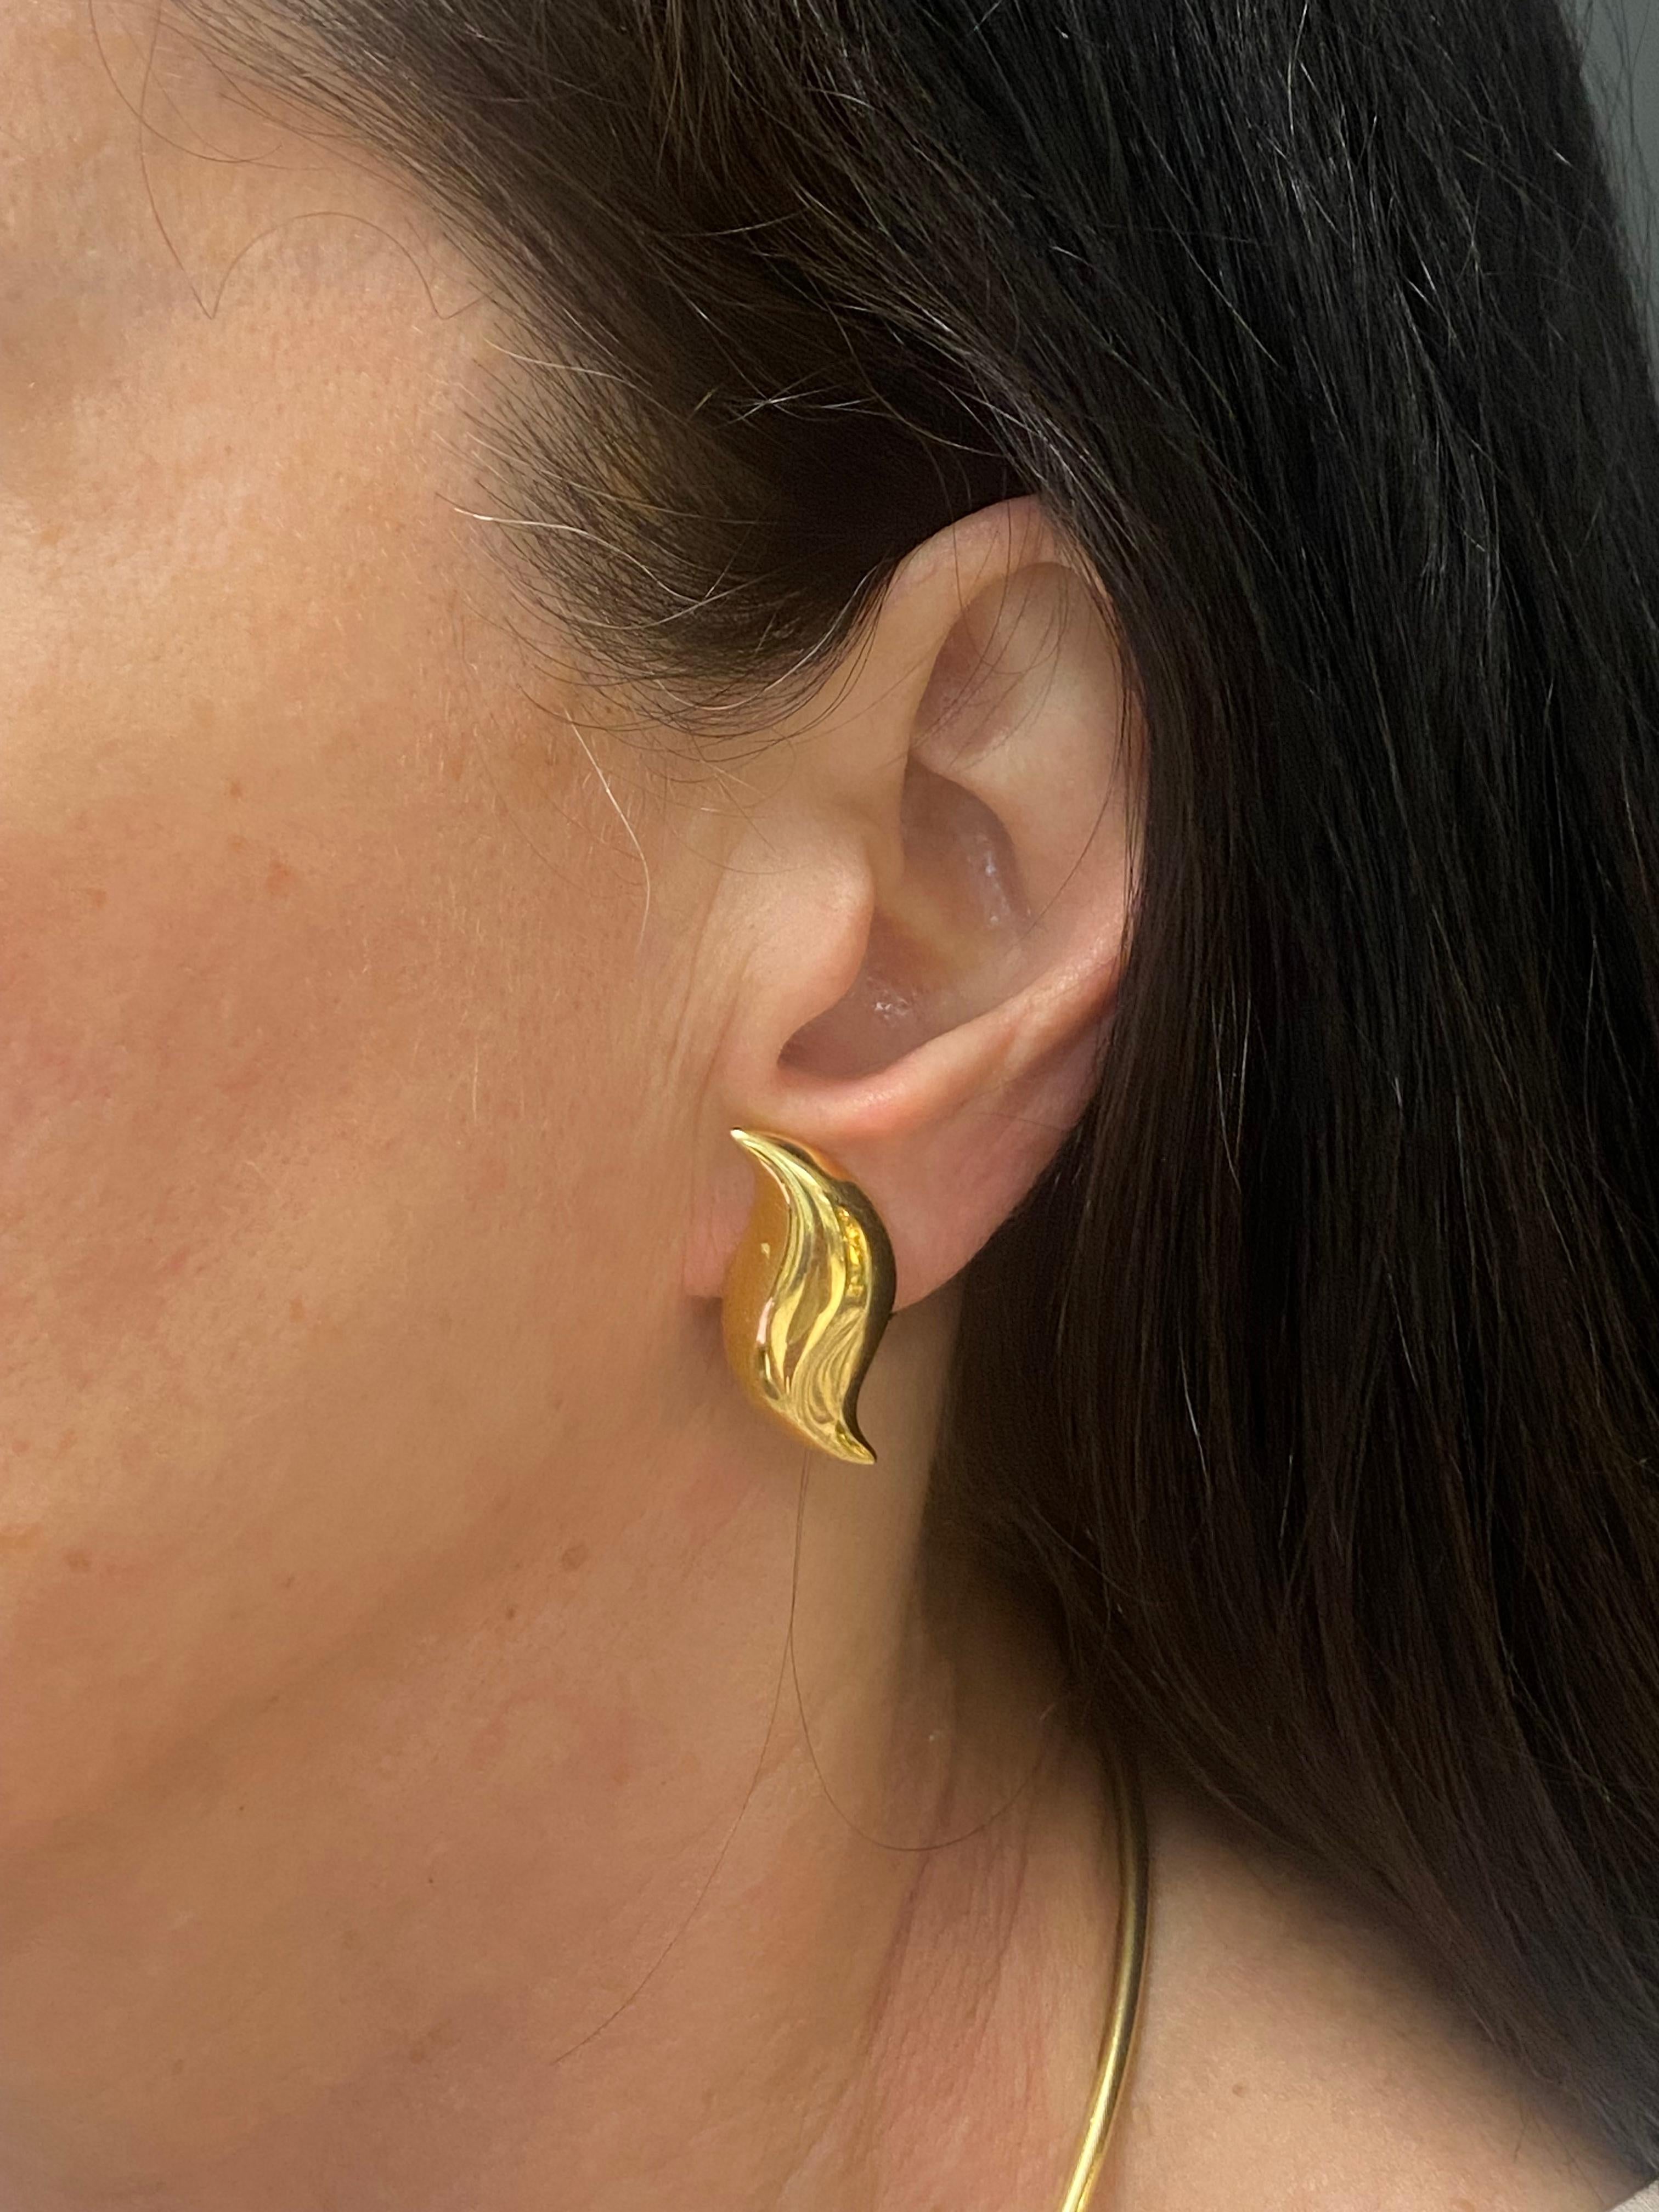 DESIGNER: Elsa Peretti for Tiffany & Co.
CIRCA: 1980’s
MATERIALS: 18k Yellow Gold
WEIGHT:  11.6 grams
MEASUREMENTS: 1 1/4” x 1/2”
HALLMARKS: Tiffany & Co., Elsa Peretti, Spain, 750

ITEM DETAILS:
A pair of 18k gold earrings by Elsa Peretti for